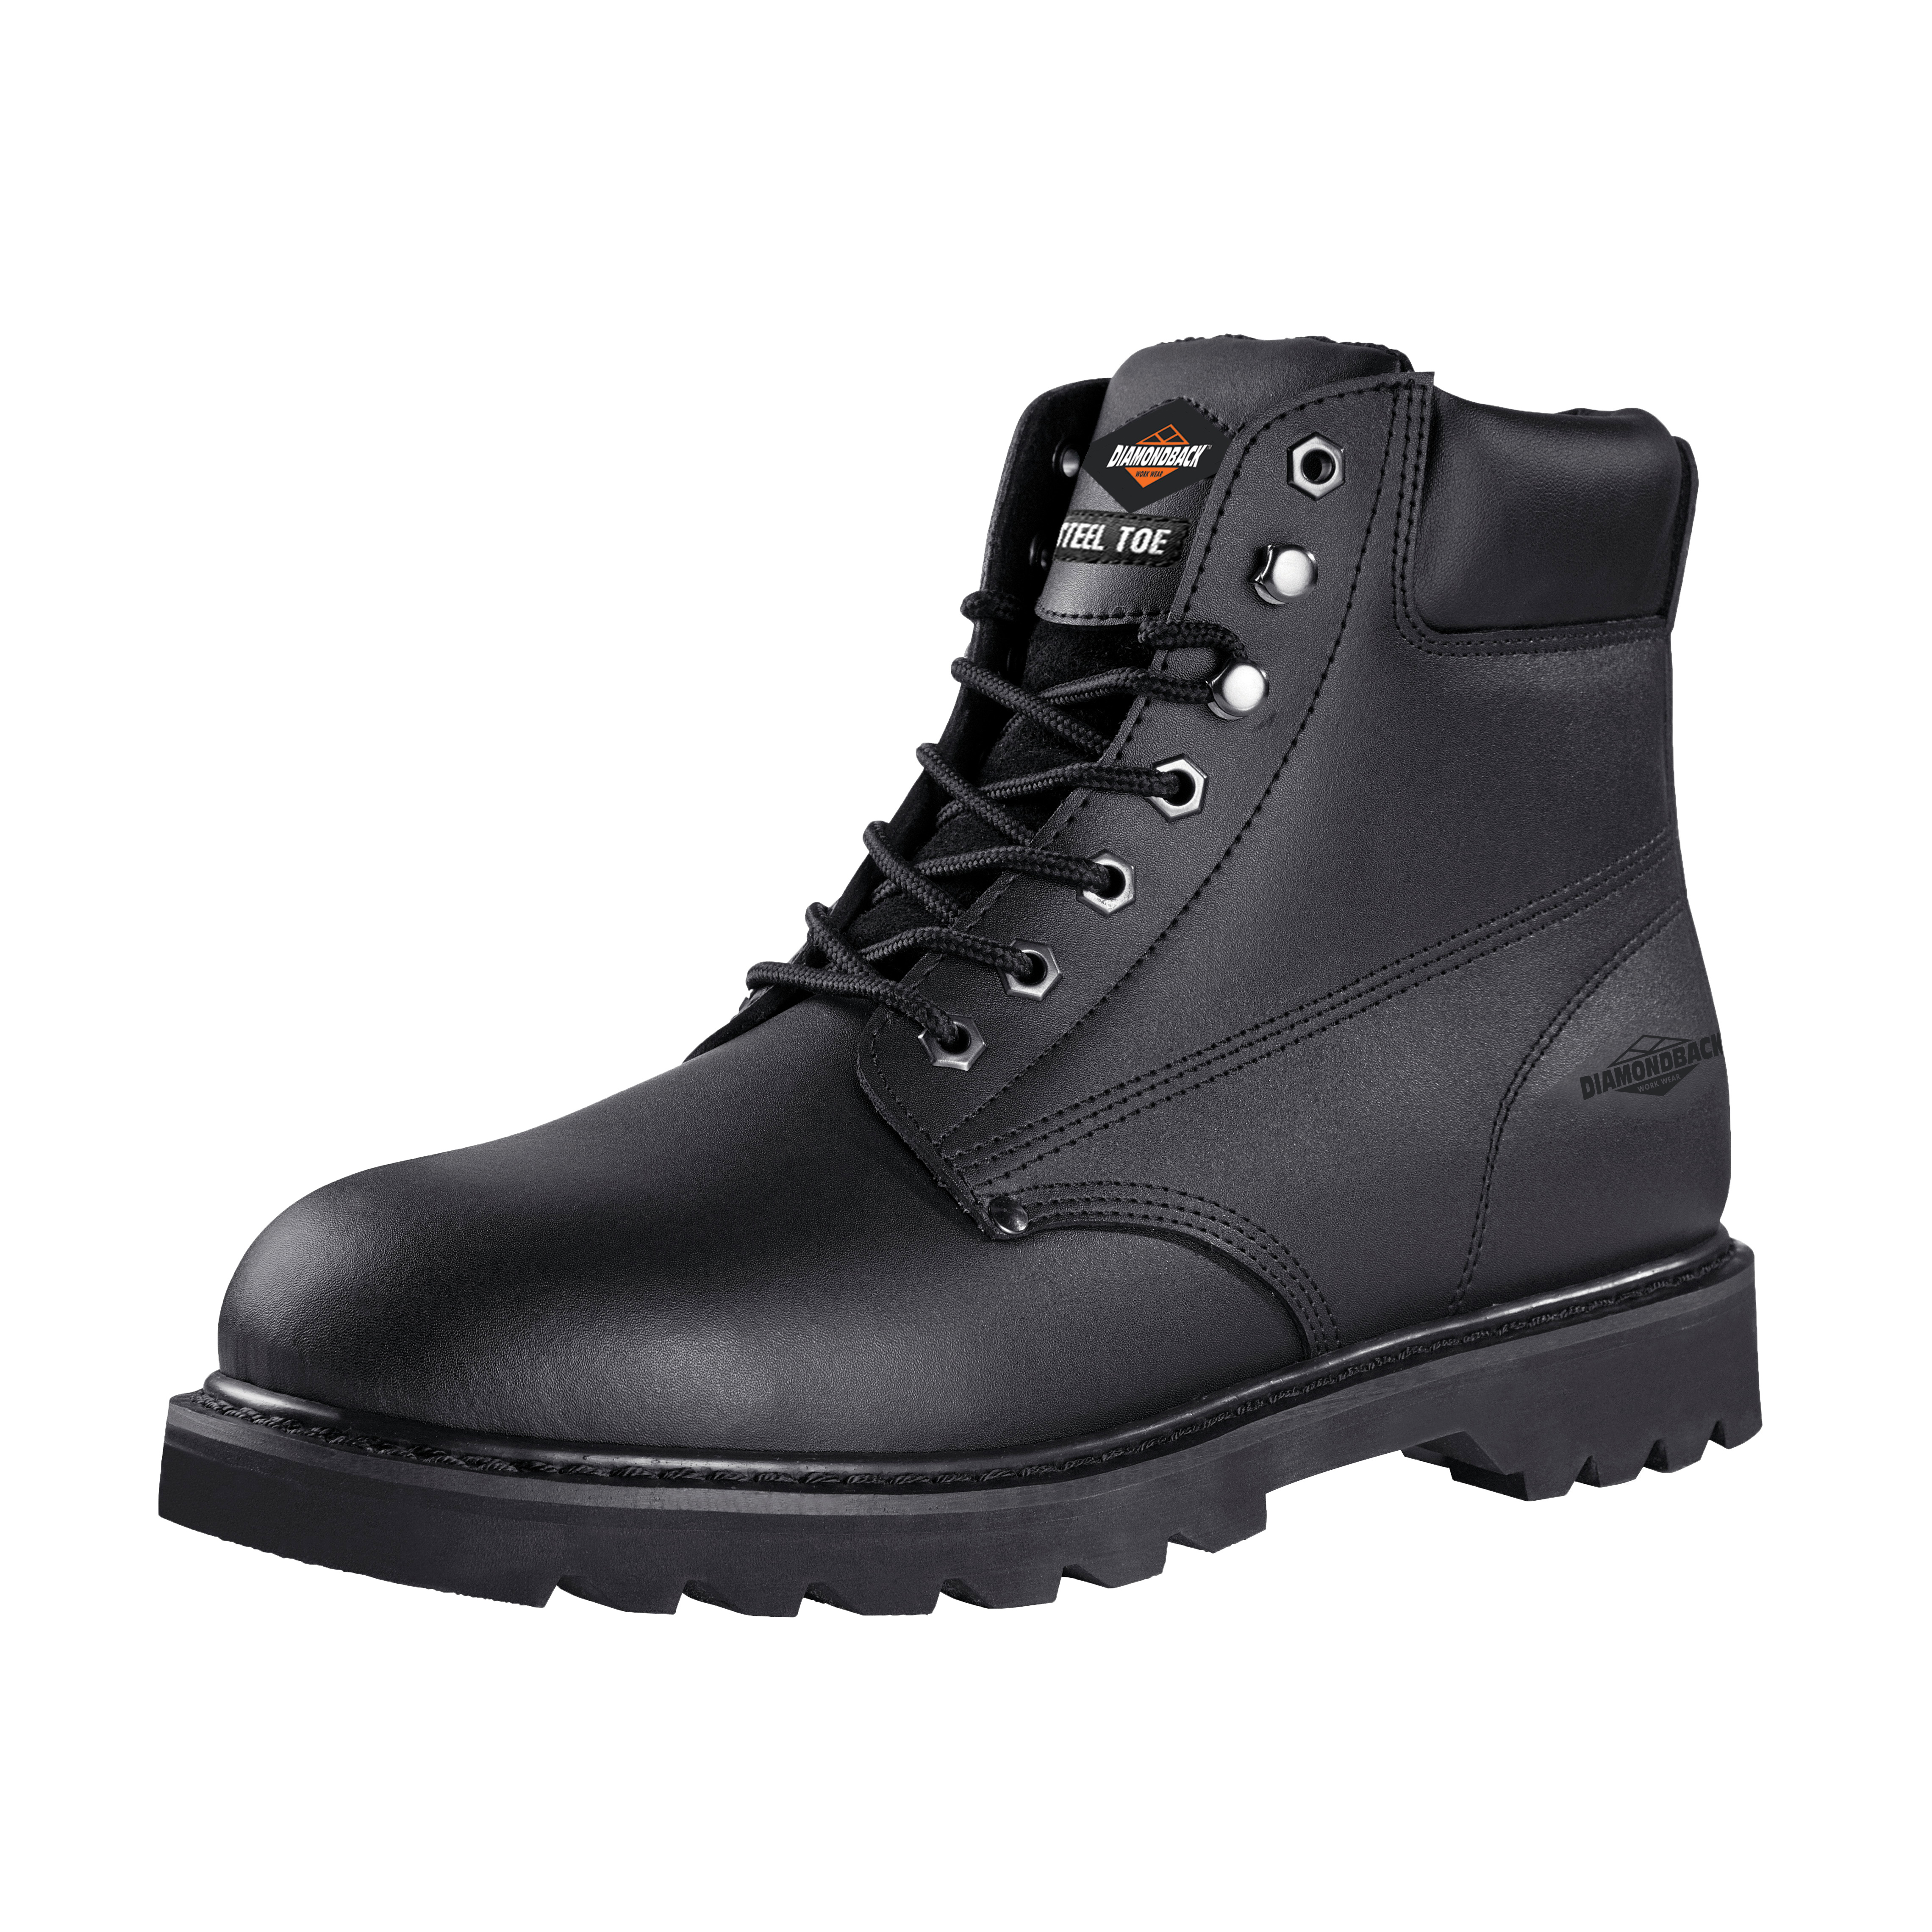 655SS-13 Work Boots, 13, Medium Shoe Last W, Black, Leather Upper, Lace-Up Boots Closure, With Lining